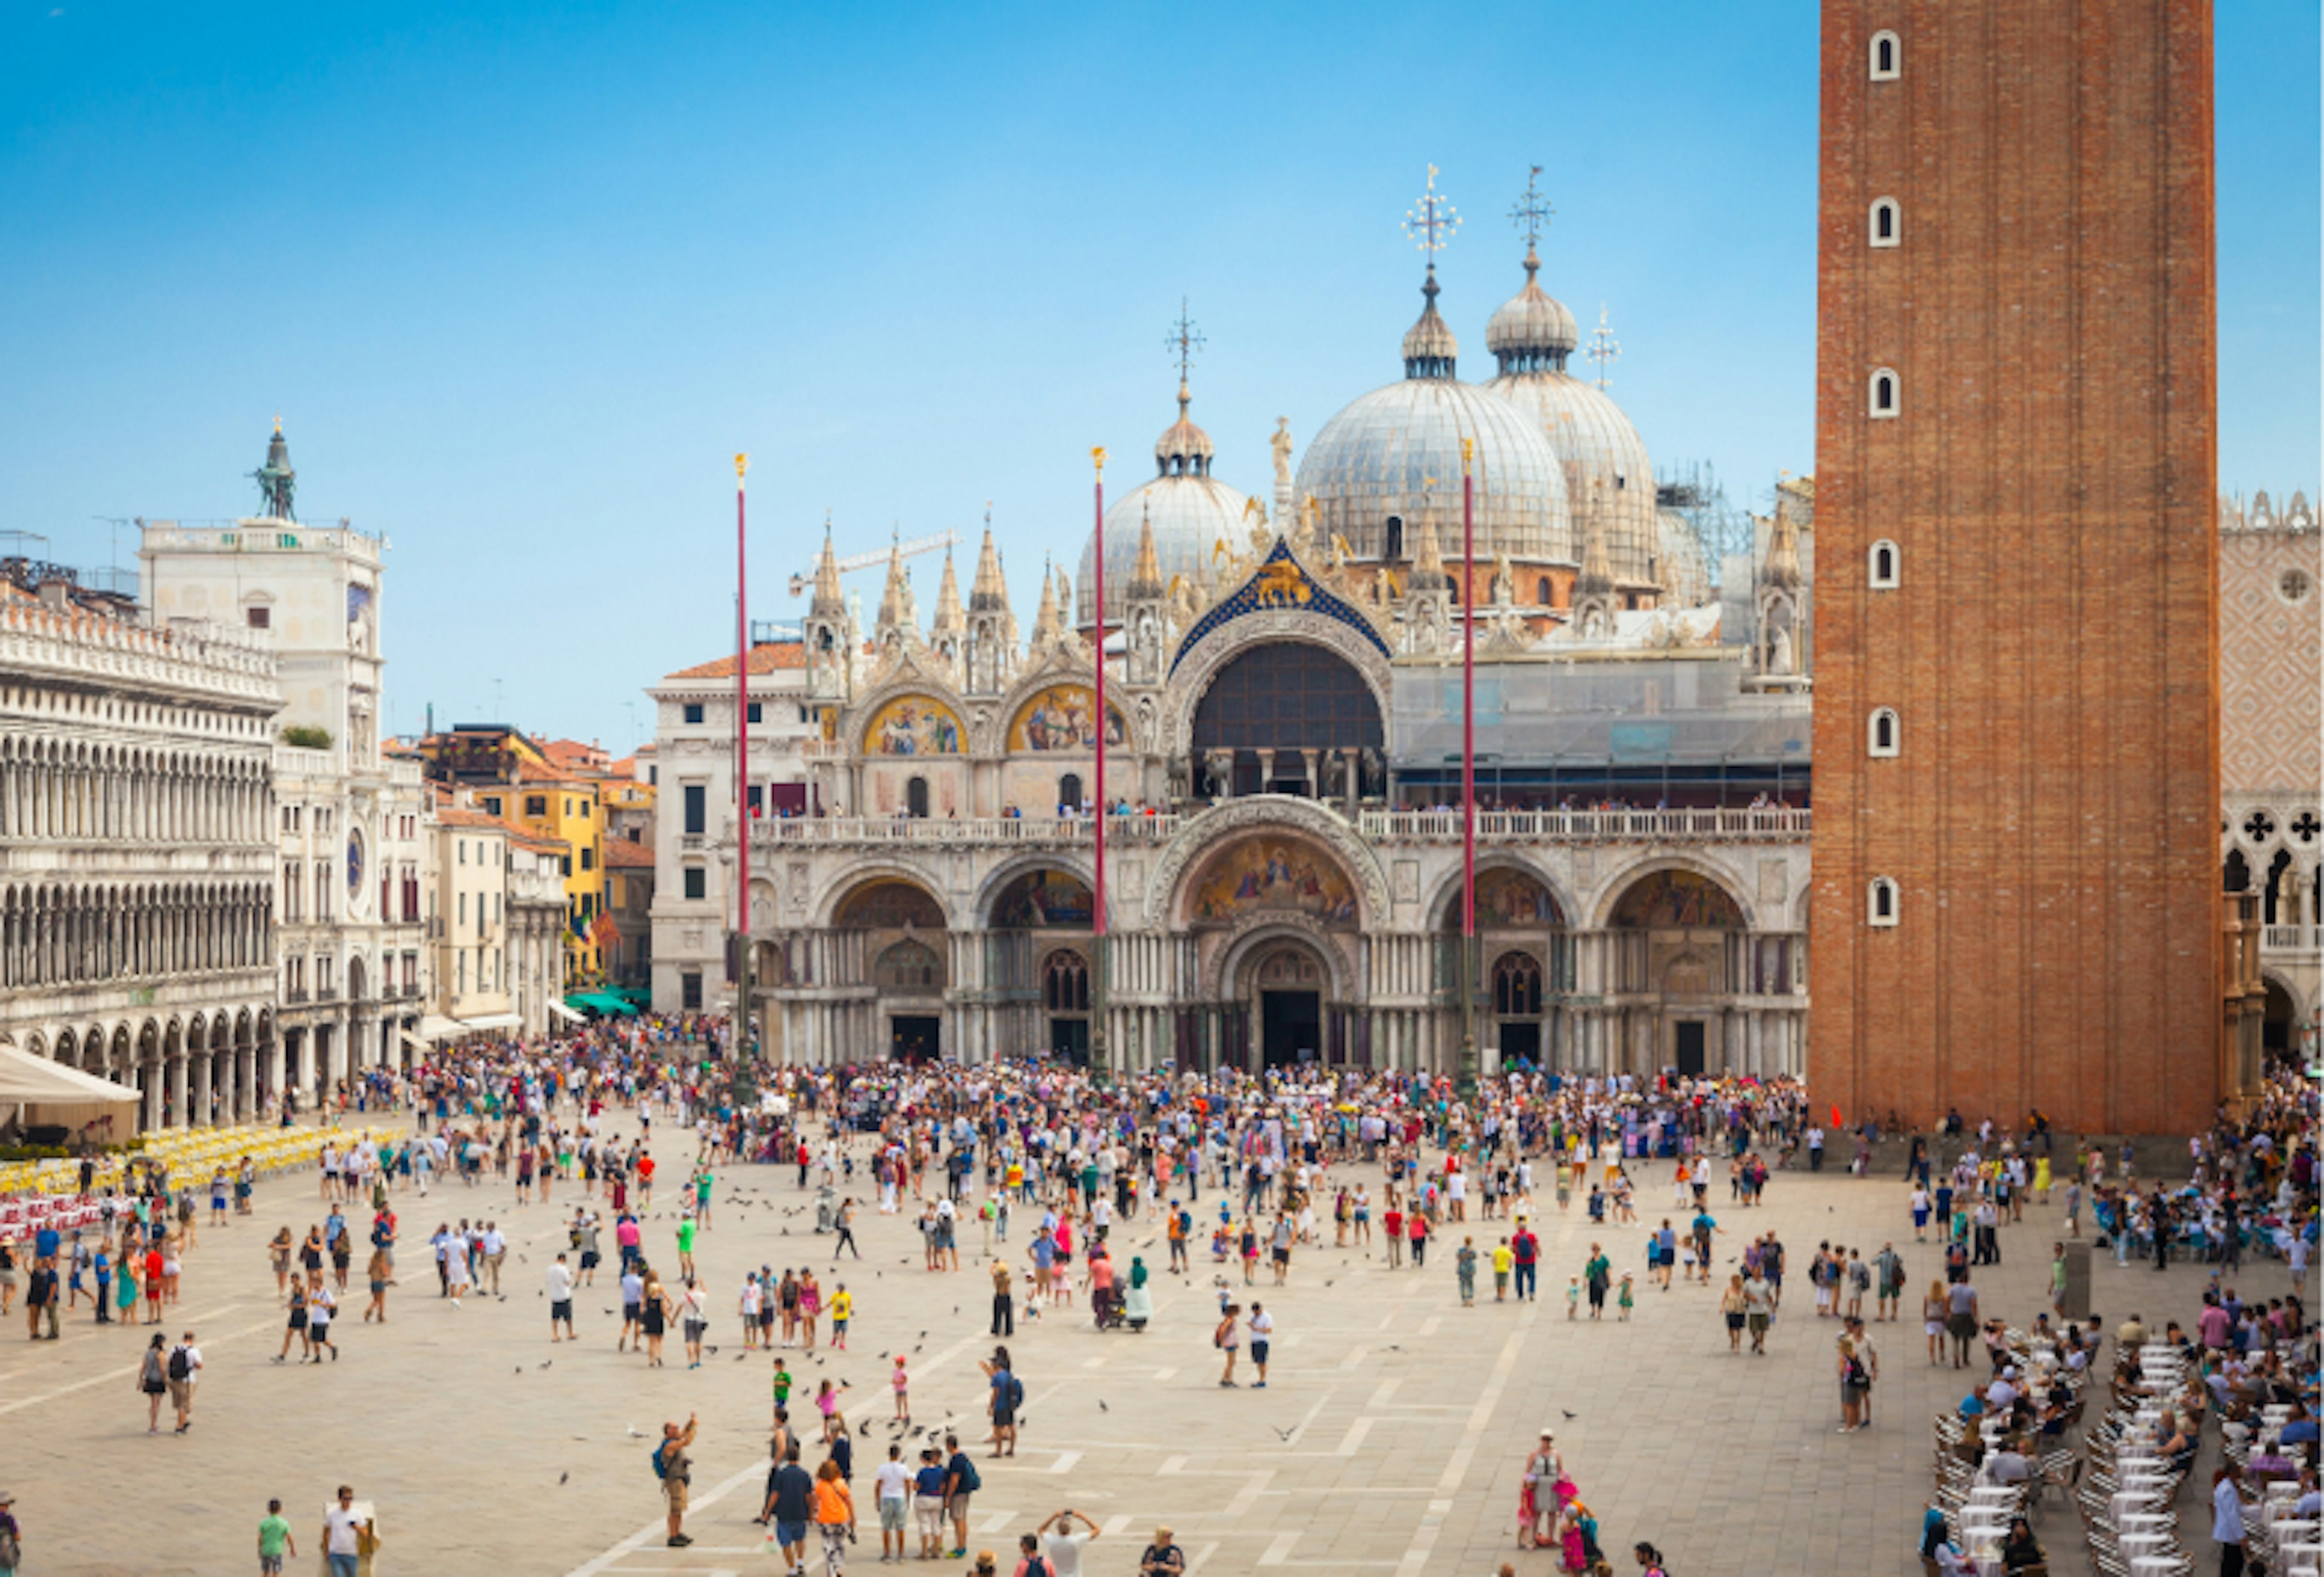 Piazza San Marco with the Basilica of Saint Mark and the bell tower of St Mark's Campanile (Campanile di San Marco) in Venice, Italy